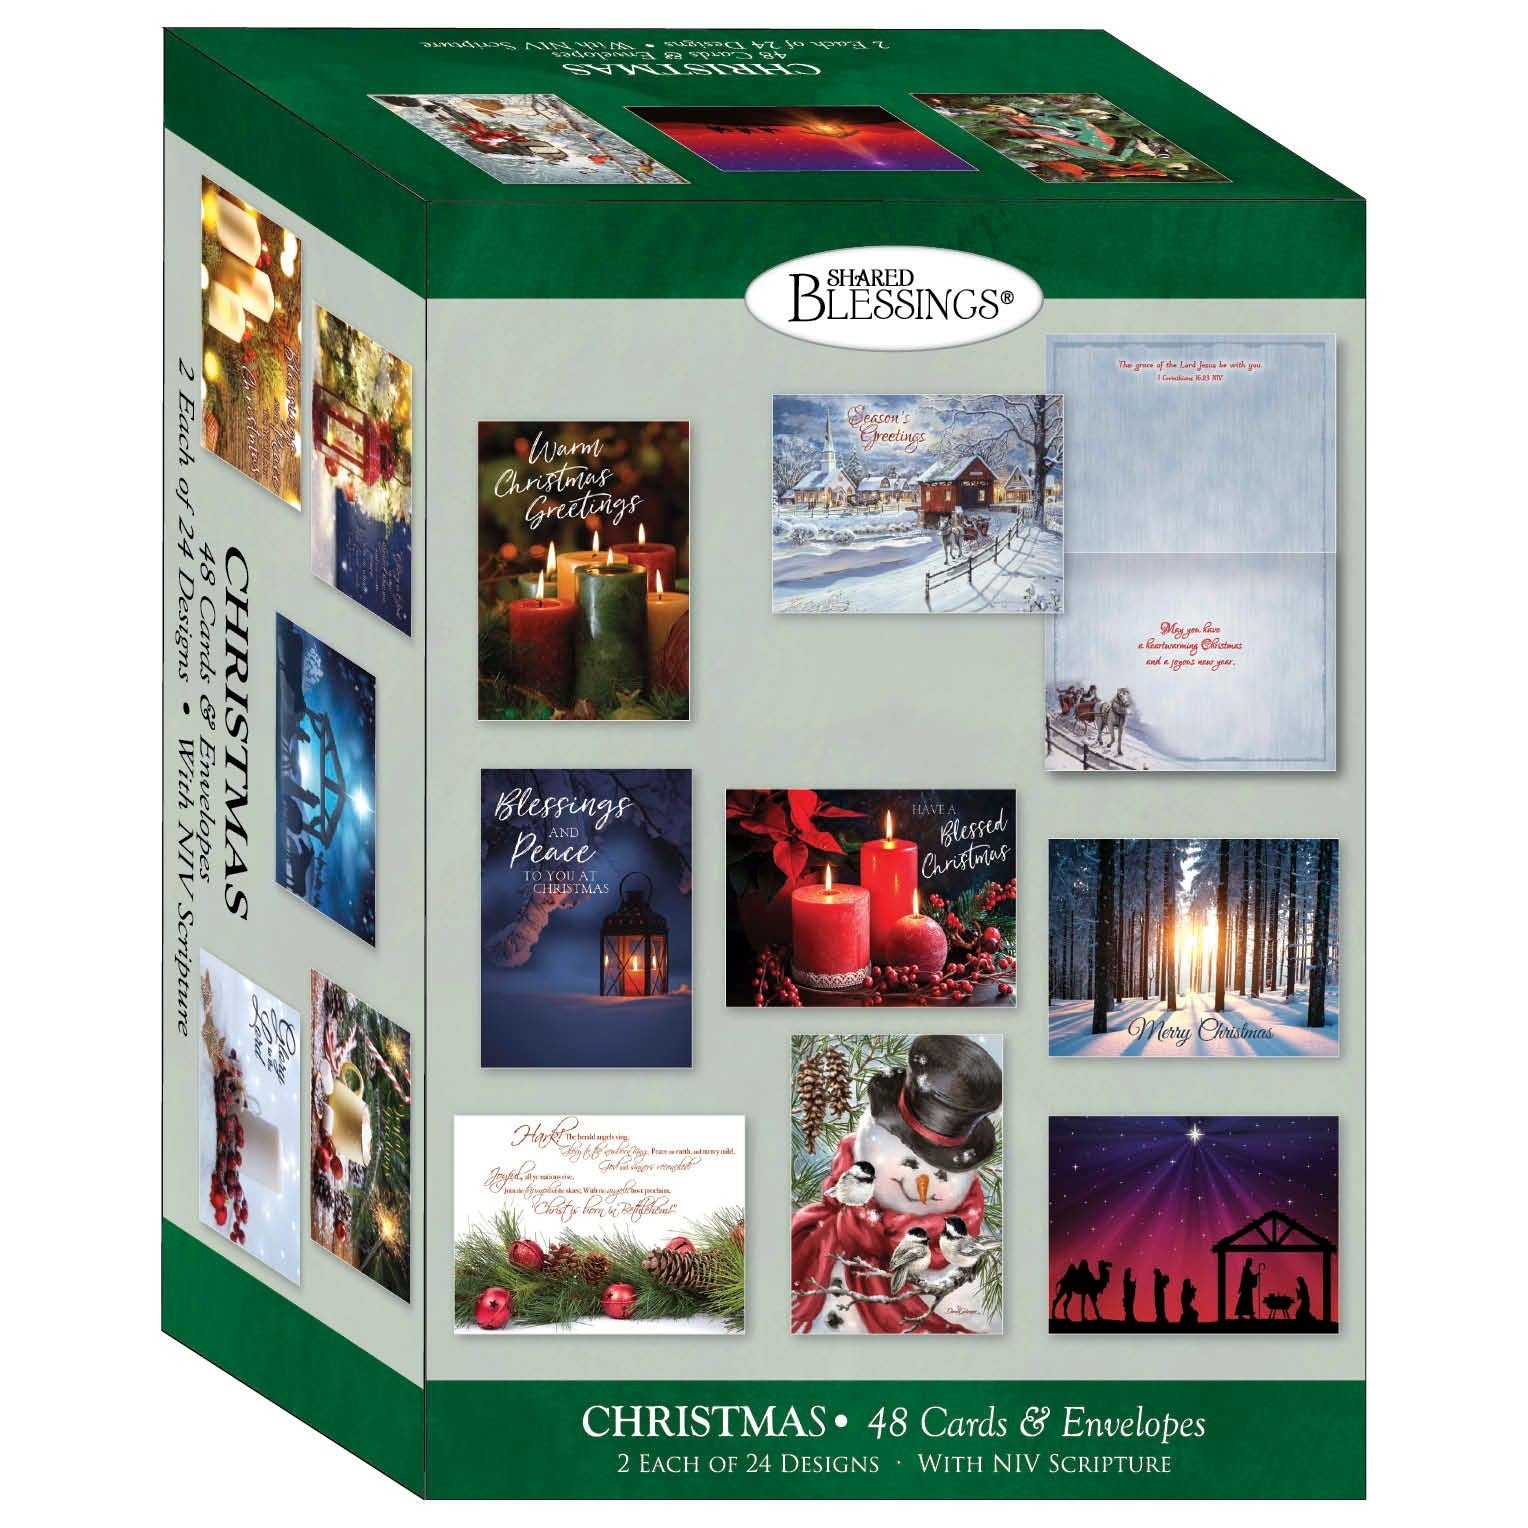 Seed of Abraham Christian Bookstore - (In)Courage - Card-Boxed-Shared Blessings-Christmas-Assorted/Wonderful Time Of The Year (Box Of 48)